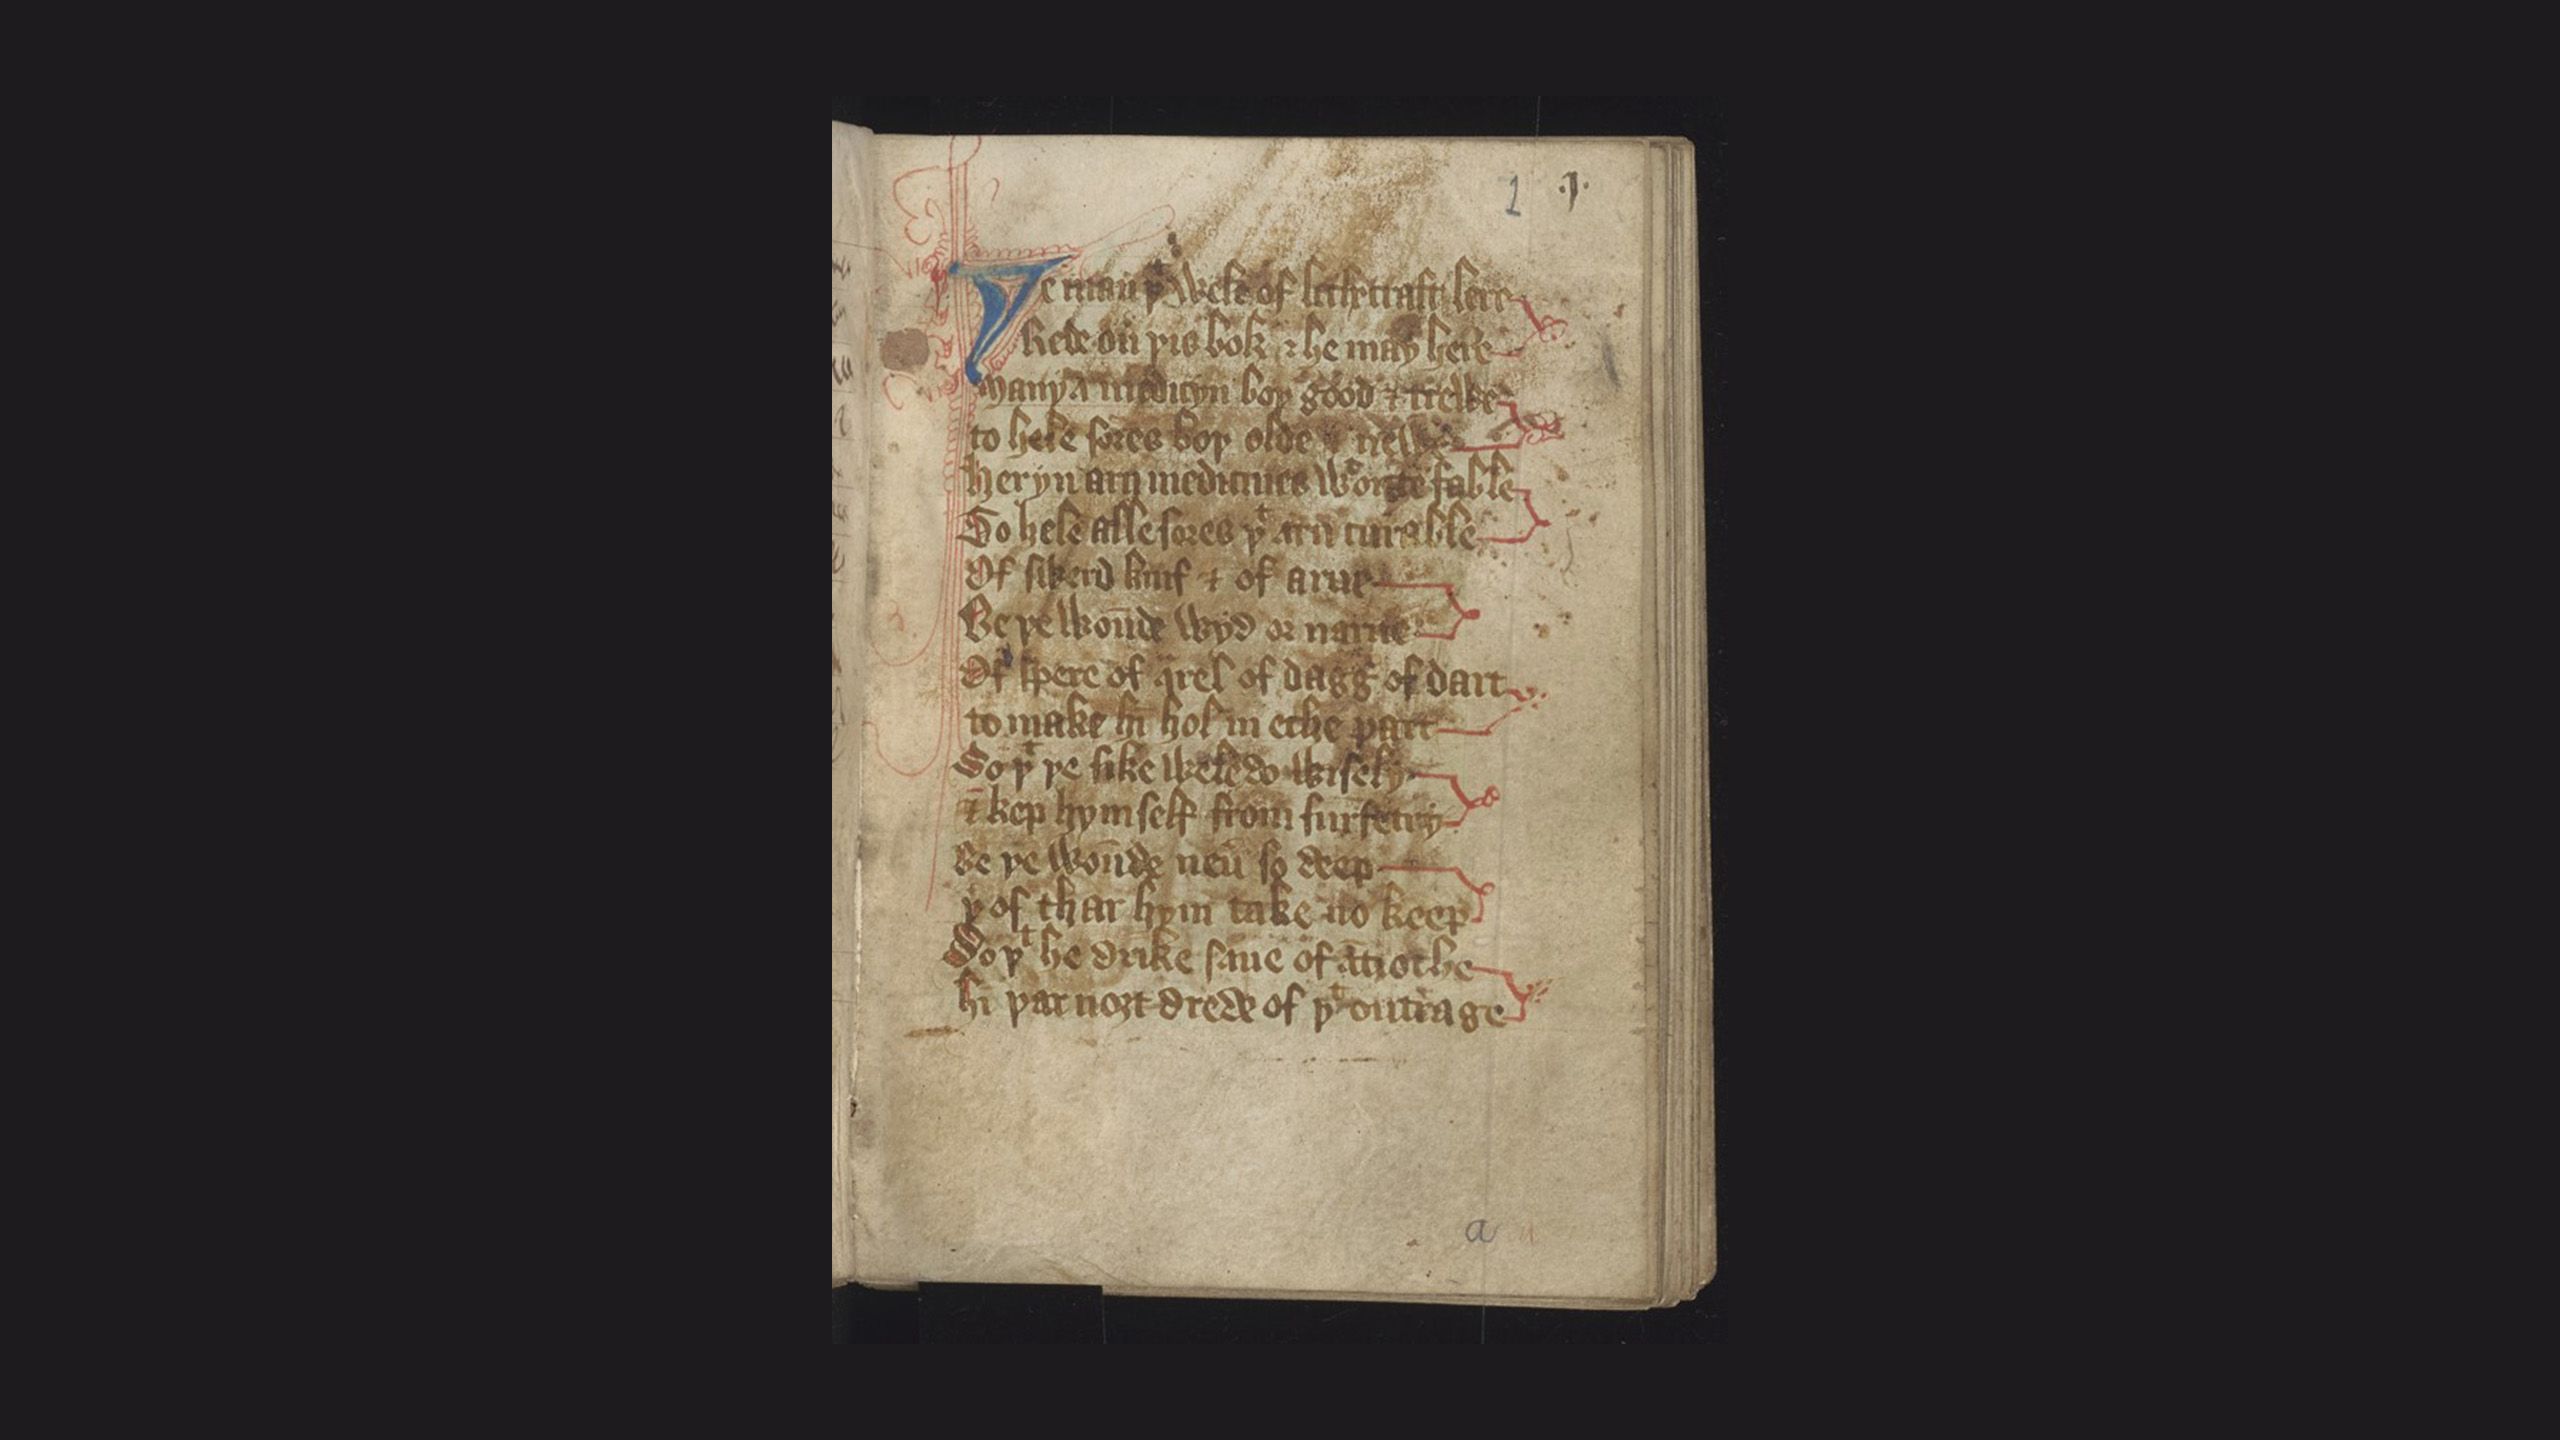 An image of an introduction, written in rhyming couplets, to a compilation of medical recipes in Middle English and Latin